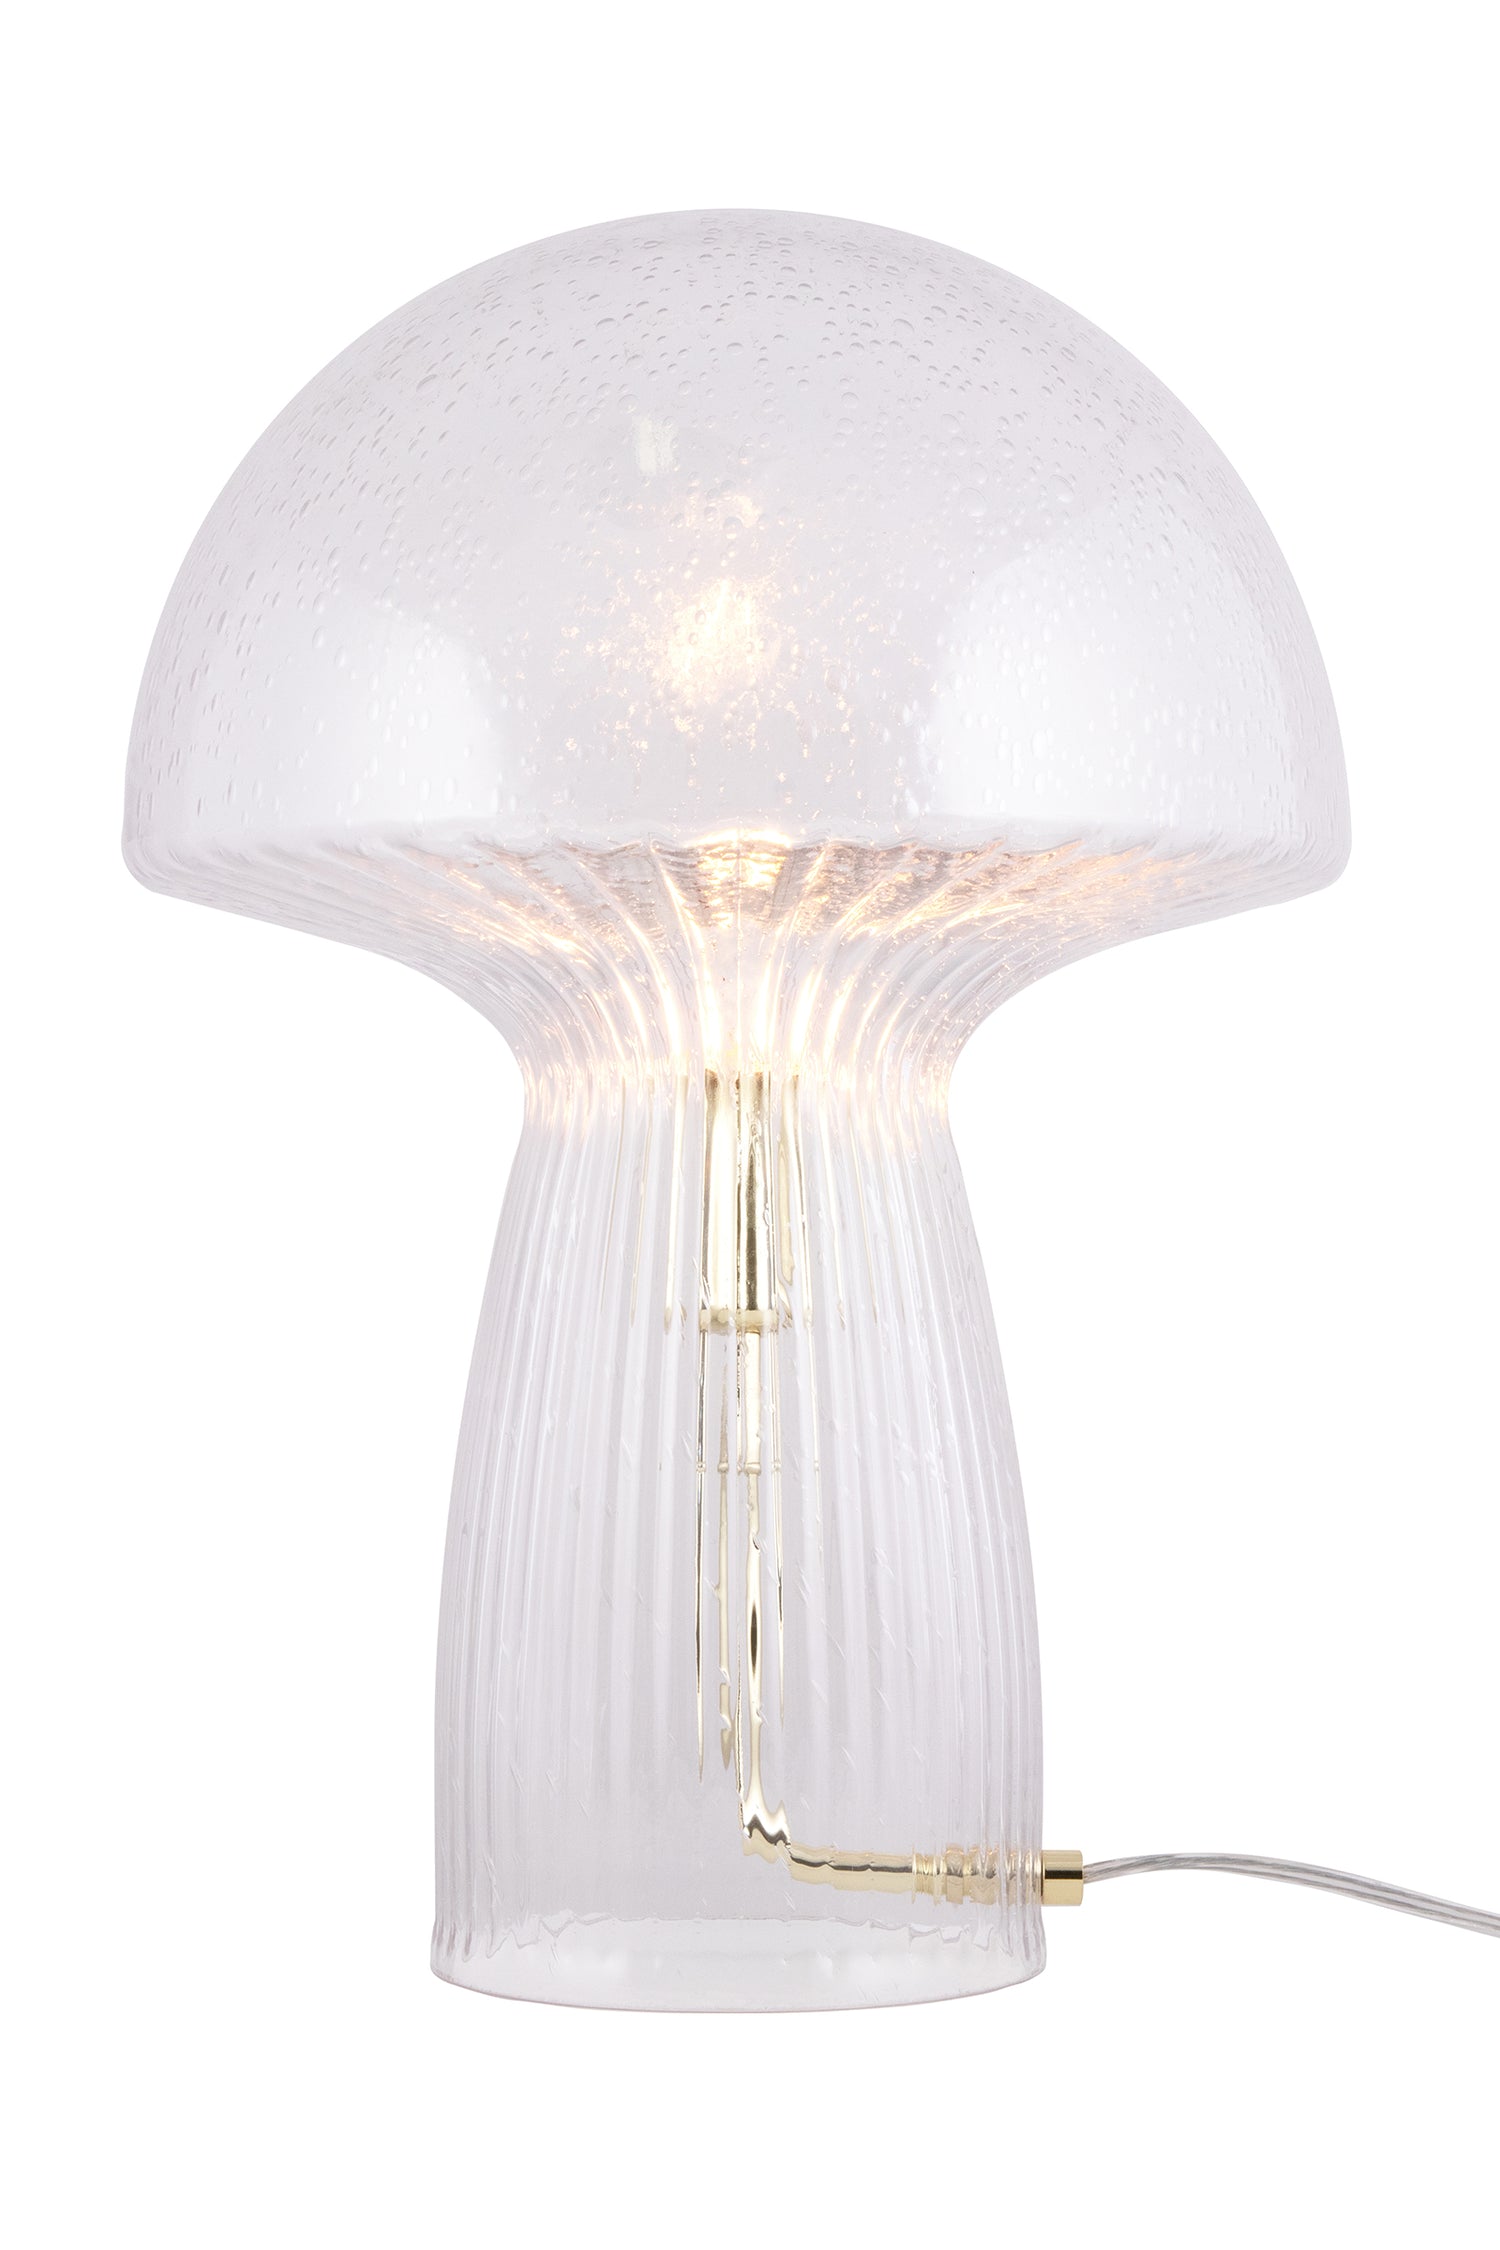 Table lamp Fungo 30, special edition, clear